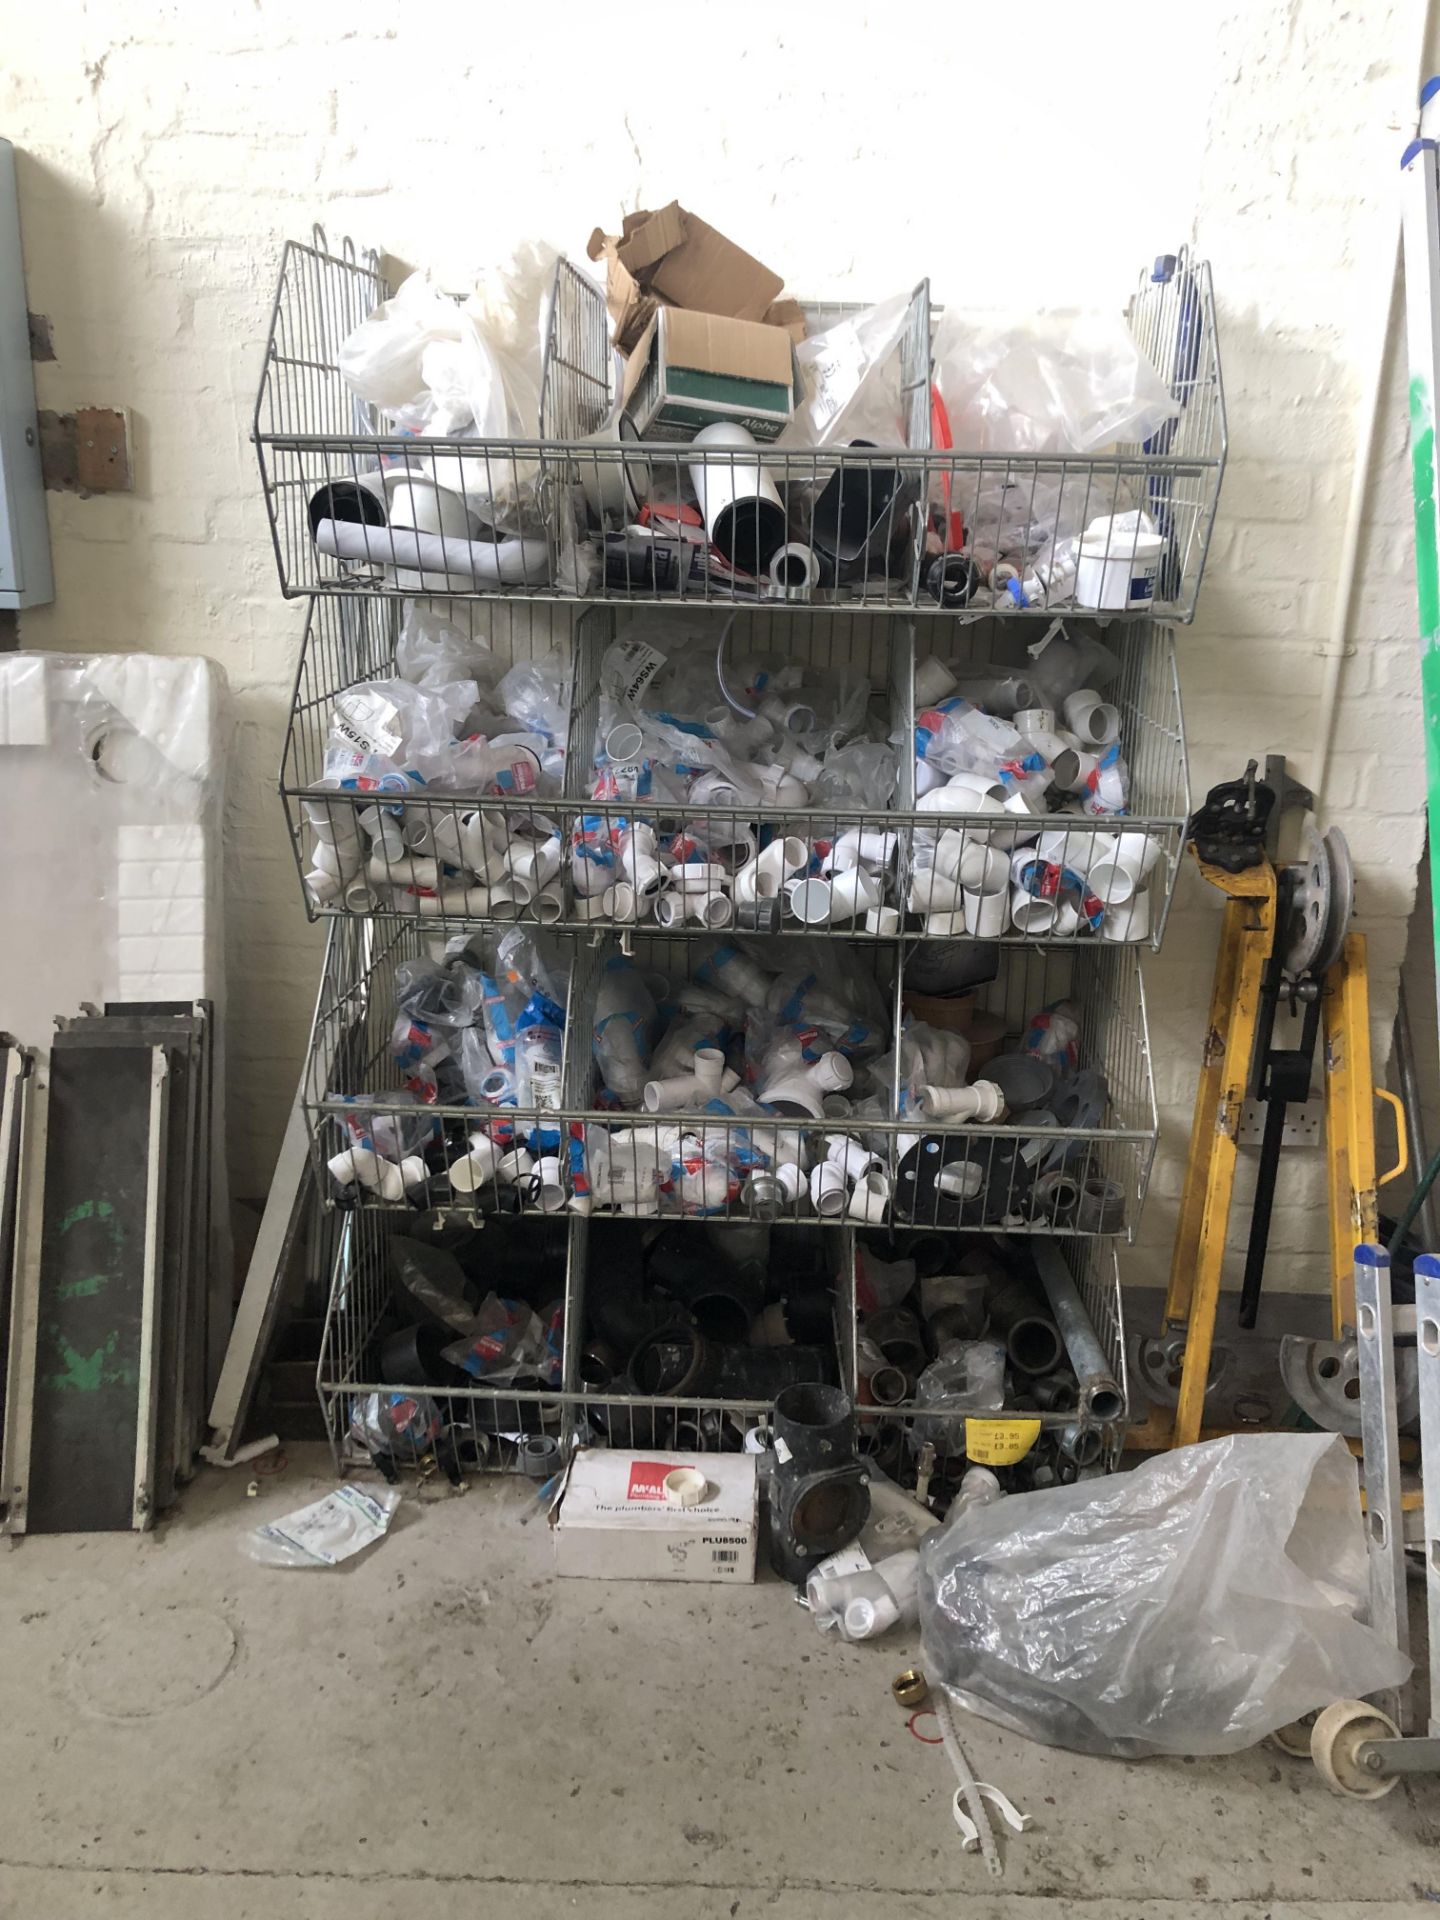 Contents of Plumbers Store - Image 26 of 40